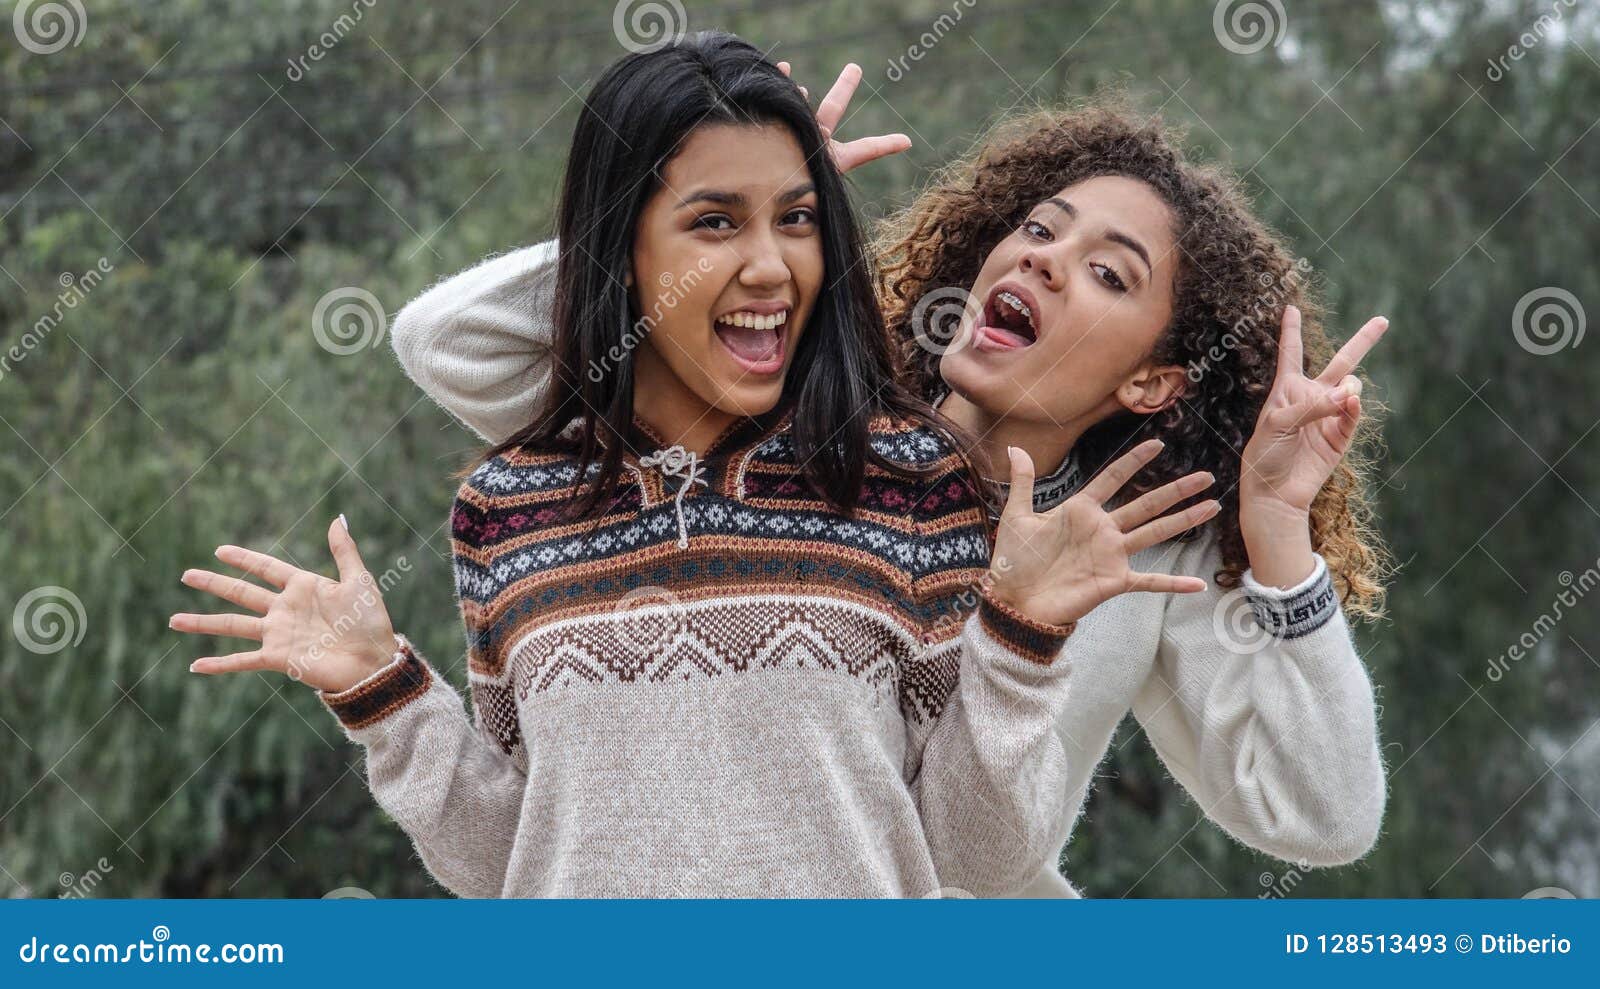 Excited young teen girls